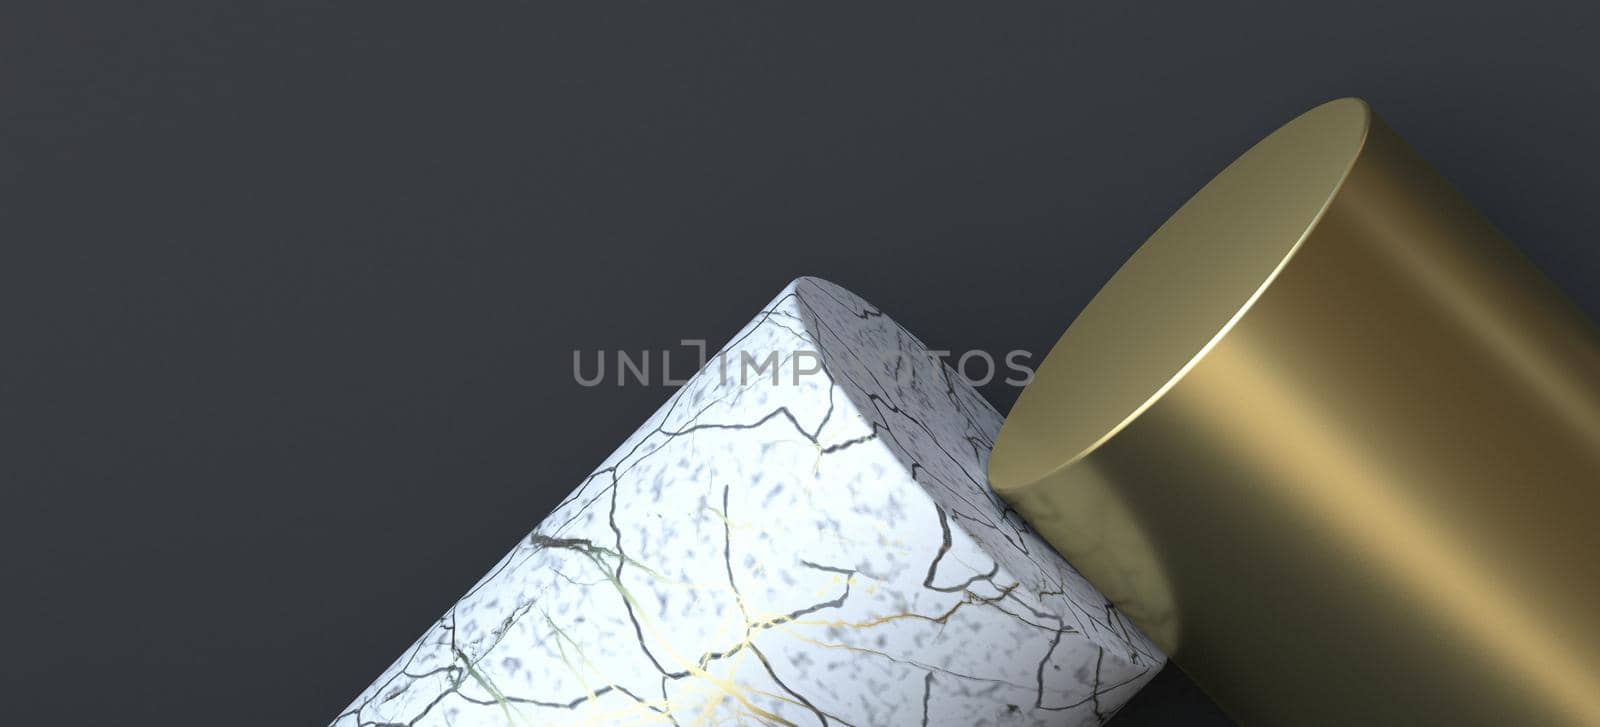 Abstract background made of white marble cylinder and golden one 3D render illustration on black background